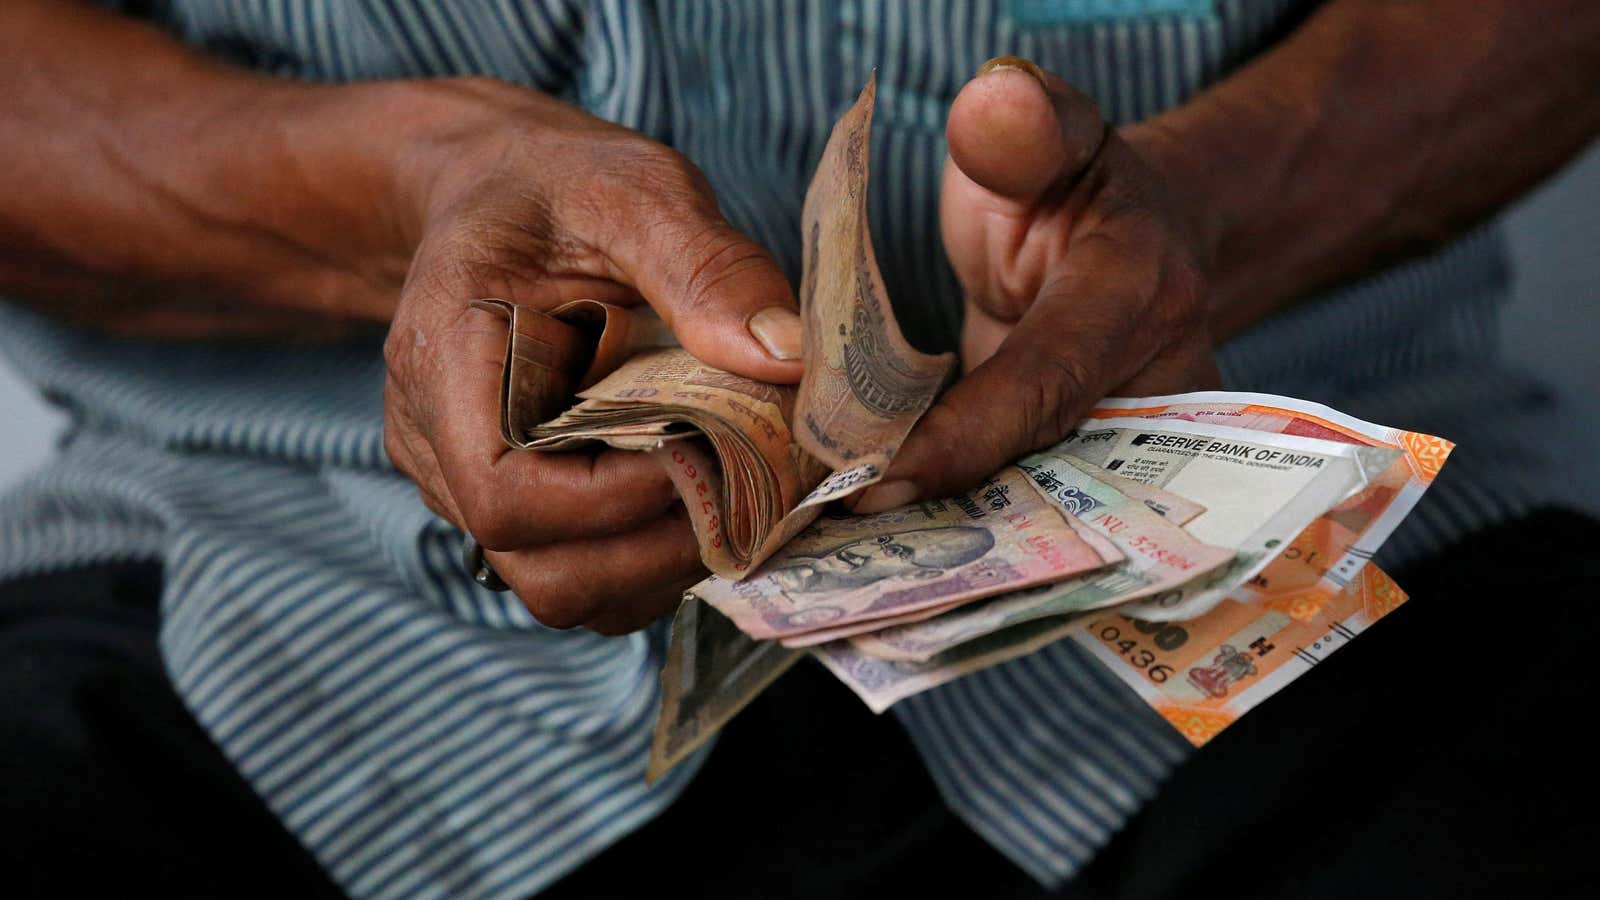 Six years after demonetization, cash has roared back in India